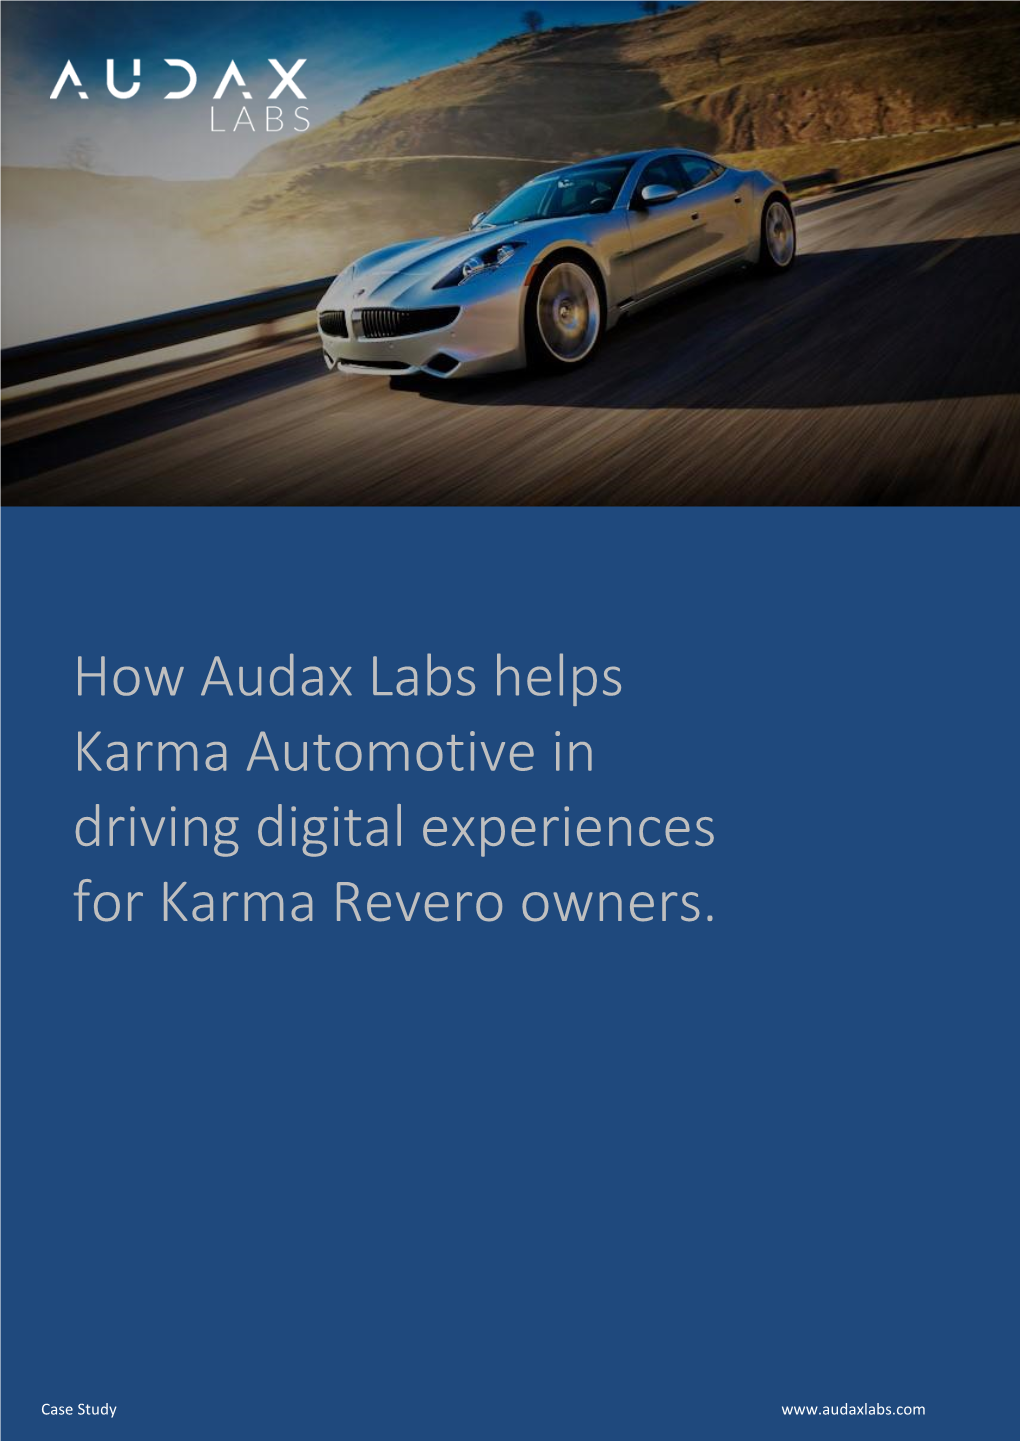 How Audax Labs Helps Karma Automotive in Driving Digital